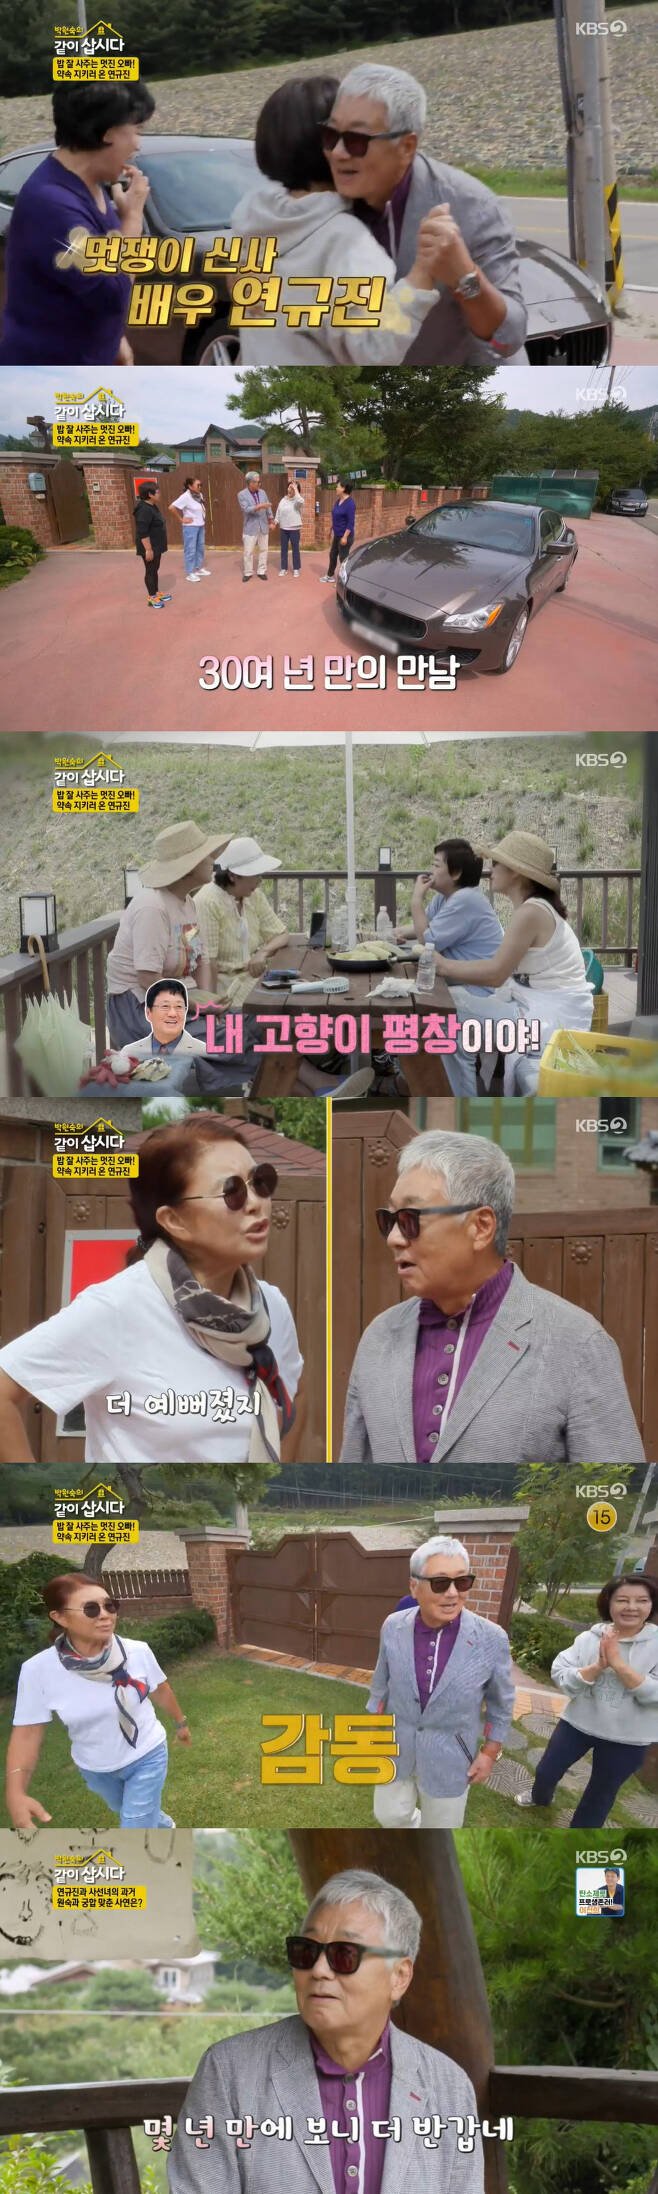 Yeon Gyu-jin revealed his love for Daughter-in-law Han Ga-in and grandchildren.On the 3rd KBS 2TV Park Won-sooks Lets Live together, Yeon Kyu-jin appeared in entertainment for 32 years.On this day, a sage started to prepare for a precious guest comes, and the identity of the VIP who appeared after that was Actor Yeon Kyu Jin.Earlier, a sage mentioned Yeon Kyu-jin while talking, and Kim Young-ran immediately called Yeon Kyu-jin. My hometown is Pyeongchang.I will go even if I do not come, he promised to meet with a sage.A sage that excelled in pleasure. Yeon Gyu-jin greeted with a hug of welcome to the meeting for decades.Then a sage looked at the 76-year-old speed enthusiast Yeon Kyu-jins apologetic, and Kim Chung laughed, saying, Do not you get it!Yeon Gyu-jin and a sage went on a memorable trip to the past. When a sage said, I have not seen it on TV for a while, Yeon Gyu-jin laughed, I can not go because there is no one to draw.Yeon Kyu-jin, who enjoyed his time alone while resting, said, In 2014, KBS2 is the first broadcast in seven years after ending 2 in Namchon beyond the mountains.In particular, the entertainment appearance was the last appearance of KBS2 Family Entertainment Hall which was broadcast 32 years ago in December 1989.I called him, he said, I like it.Park Won-sook then said, I got a good deal of Daughter-in-law, the plan is enormous. Then Yeon Kyu-jin said, There is nothing planned.We just followed them as they did, he said. The two marriages are marriages because they are snowy in the drama without any relation to me.At that time, Yeon Kyu-jin said, It was difficult to open up when it was popular in each agency when it was marriage. I think it is better to marriage, but then I did it.No one has an open house, she recalled.I built a big house because I was a little too hard to live with marriage, he said. But I lived for 5 ~ 6 years and said I would go out.Thats when our son went to the army, he said.Then Hye Eun said, It is good to live in a house without a groom. Kim Chung asked, Is Daughter-in-law still so beautiful?Yeon Kyu-jin said, It is beautiful even if you look at it. It is okay to not work. It is weak to a pretty woman.I have two grandchildren, my first daughter, my second son, said Yeon Kyu-jin. I want to see you if you do not see it, and it is hard after half a day.